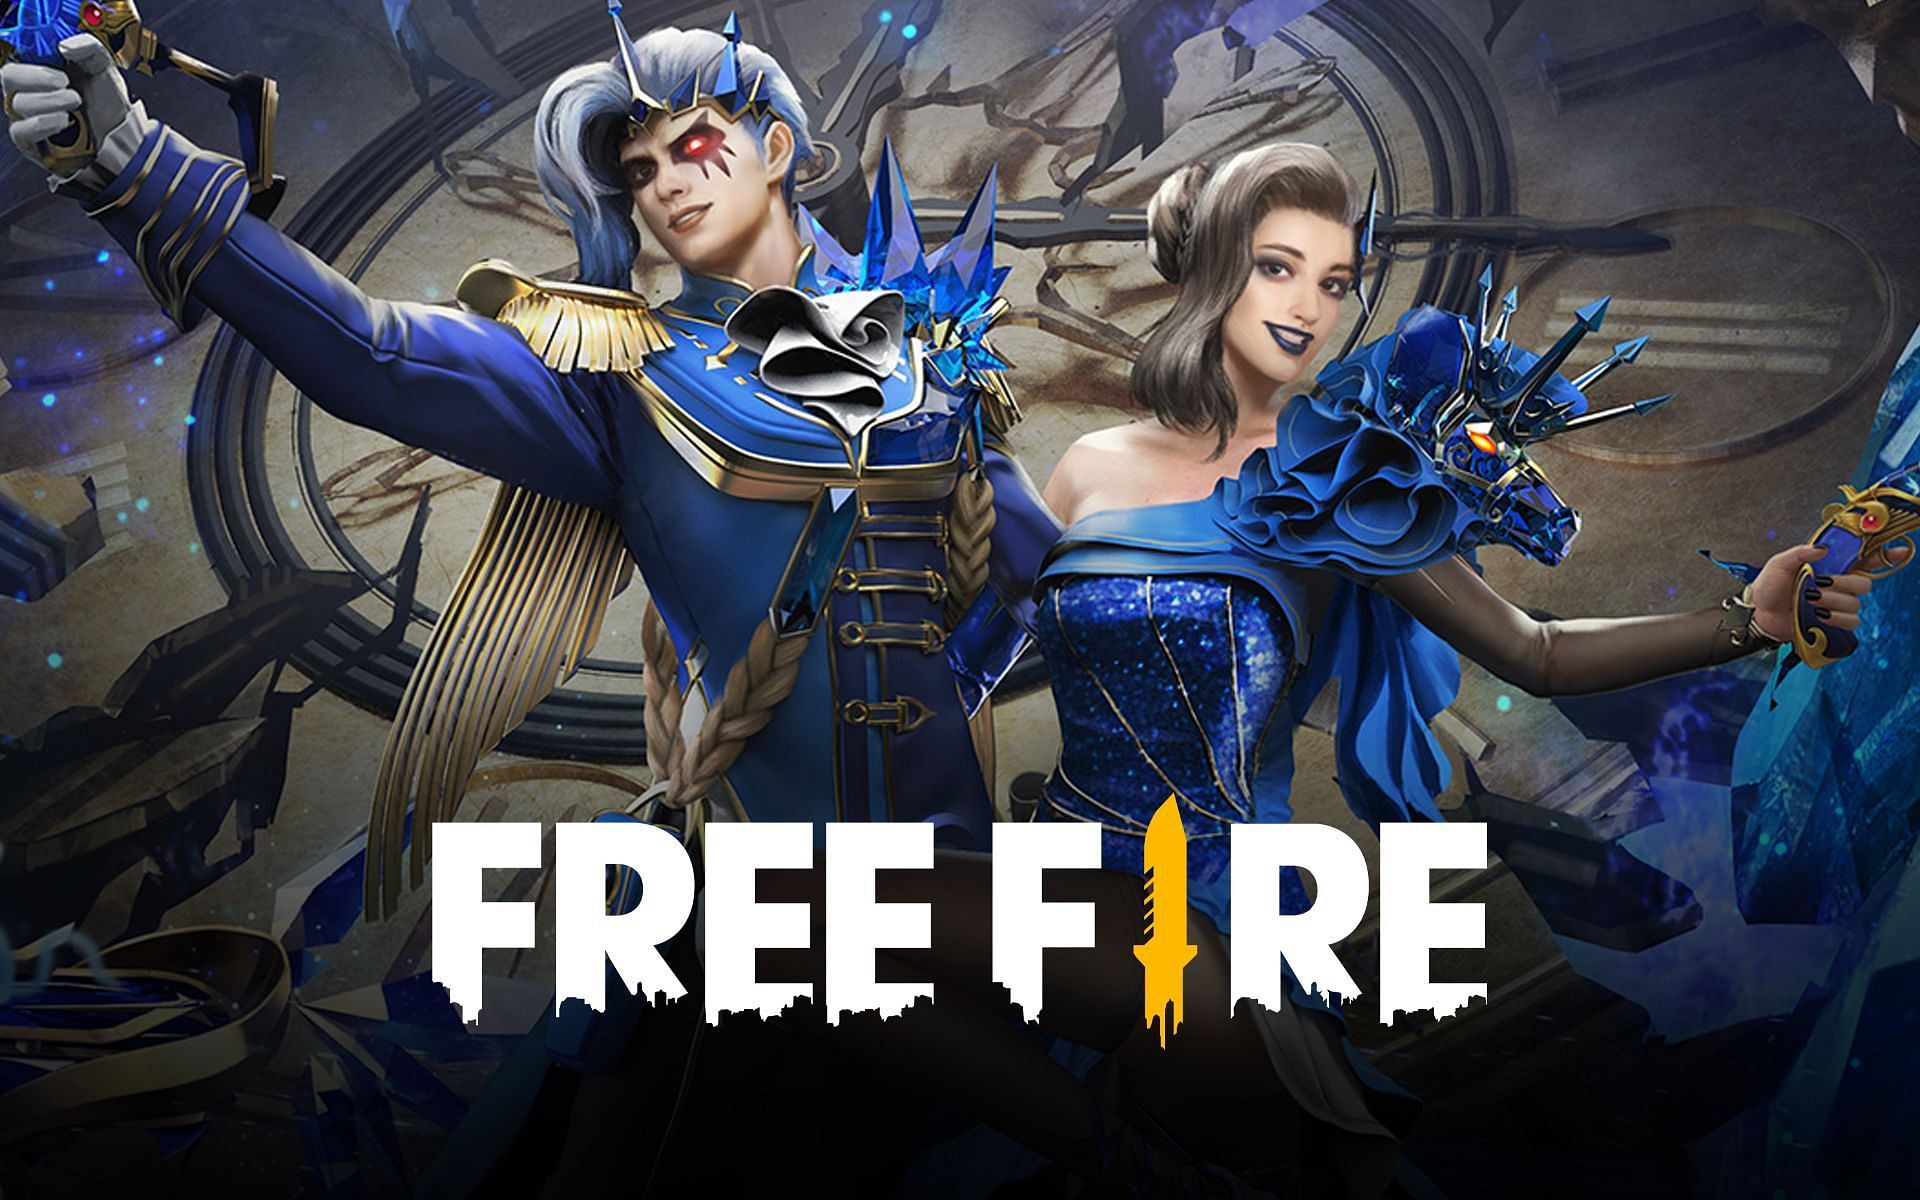 Free Fire online: How to play Free Fire game online without downloading on  mobile